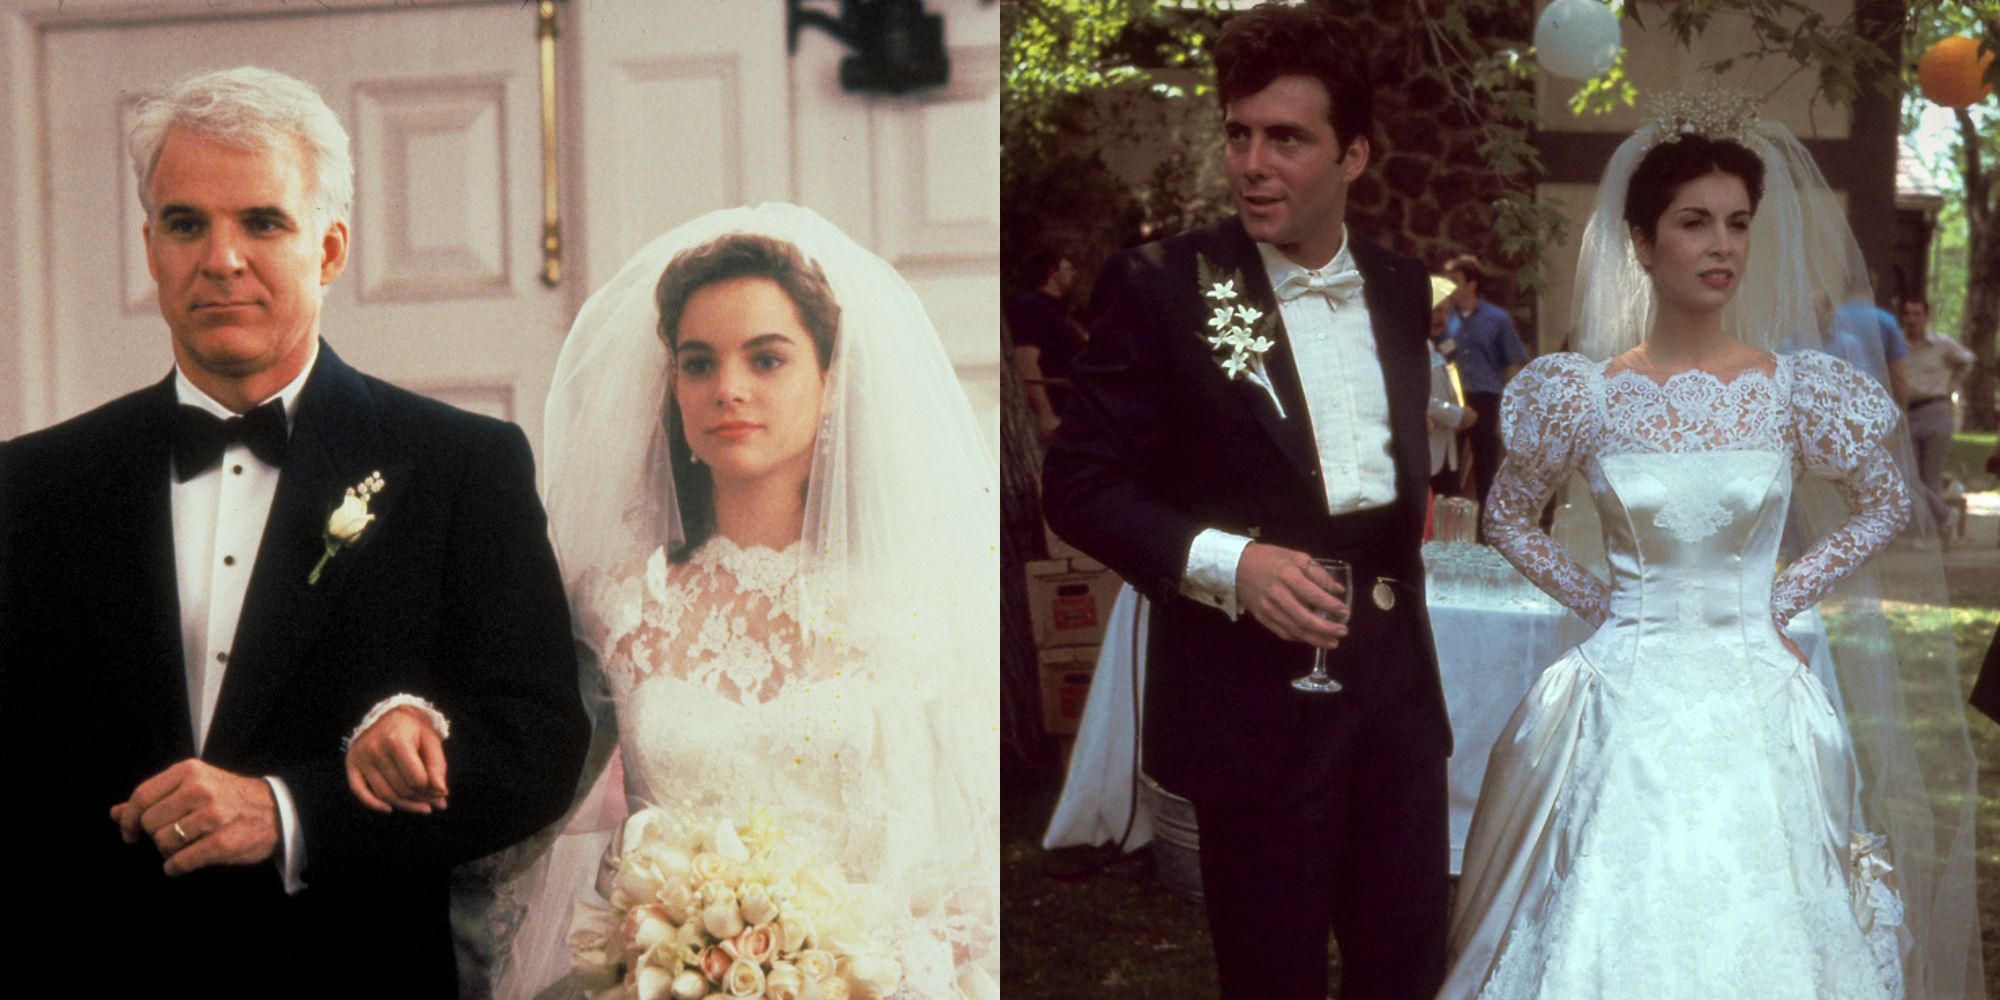 Split image showing weddings in the films Father of the Bride and The Godfather.